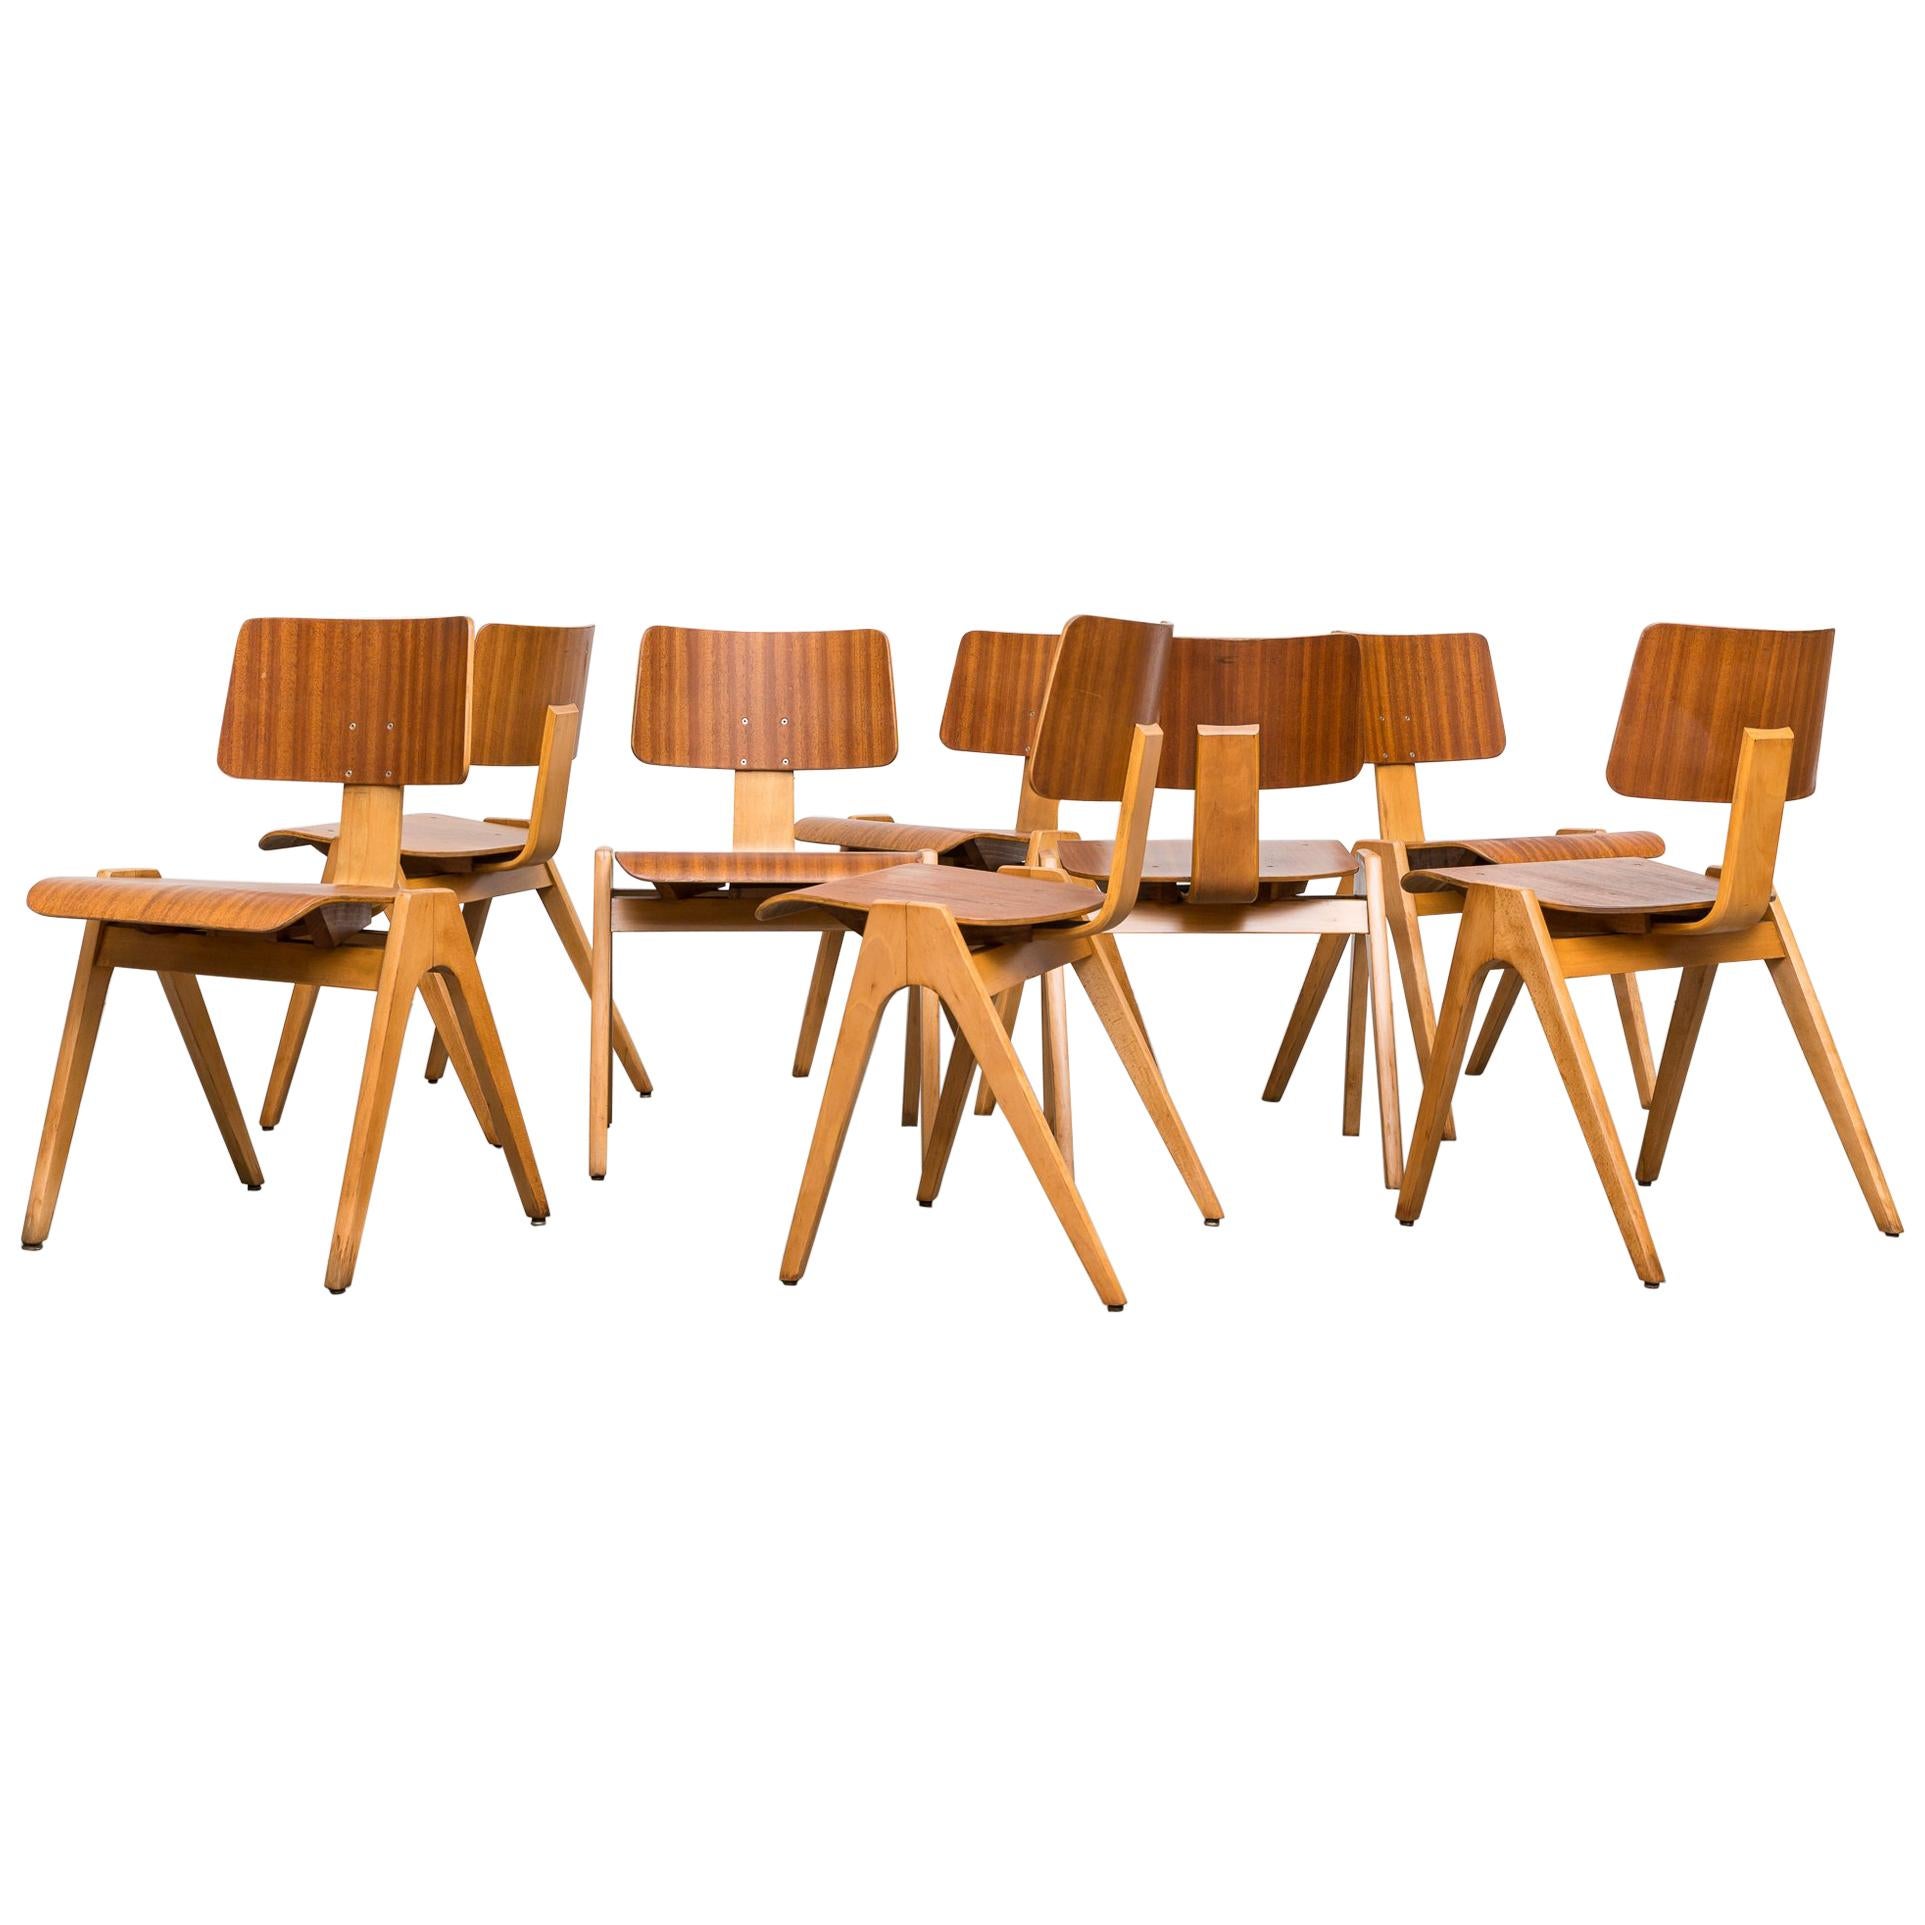 Robin Day Hille 'Hillestak' Stacking Chairs